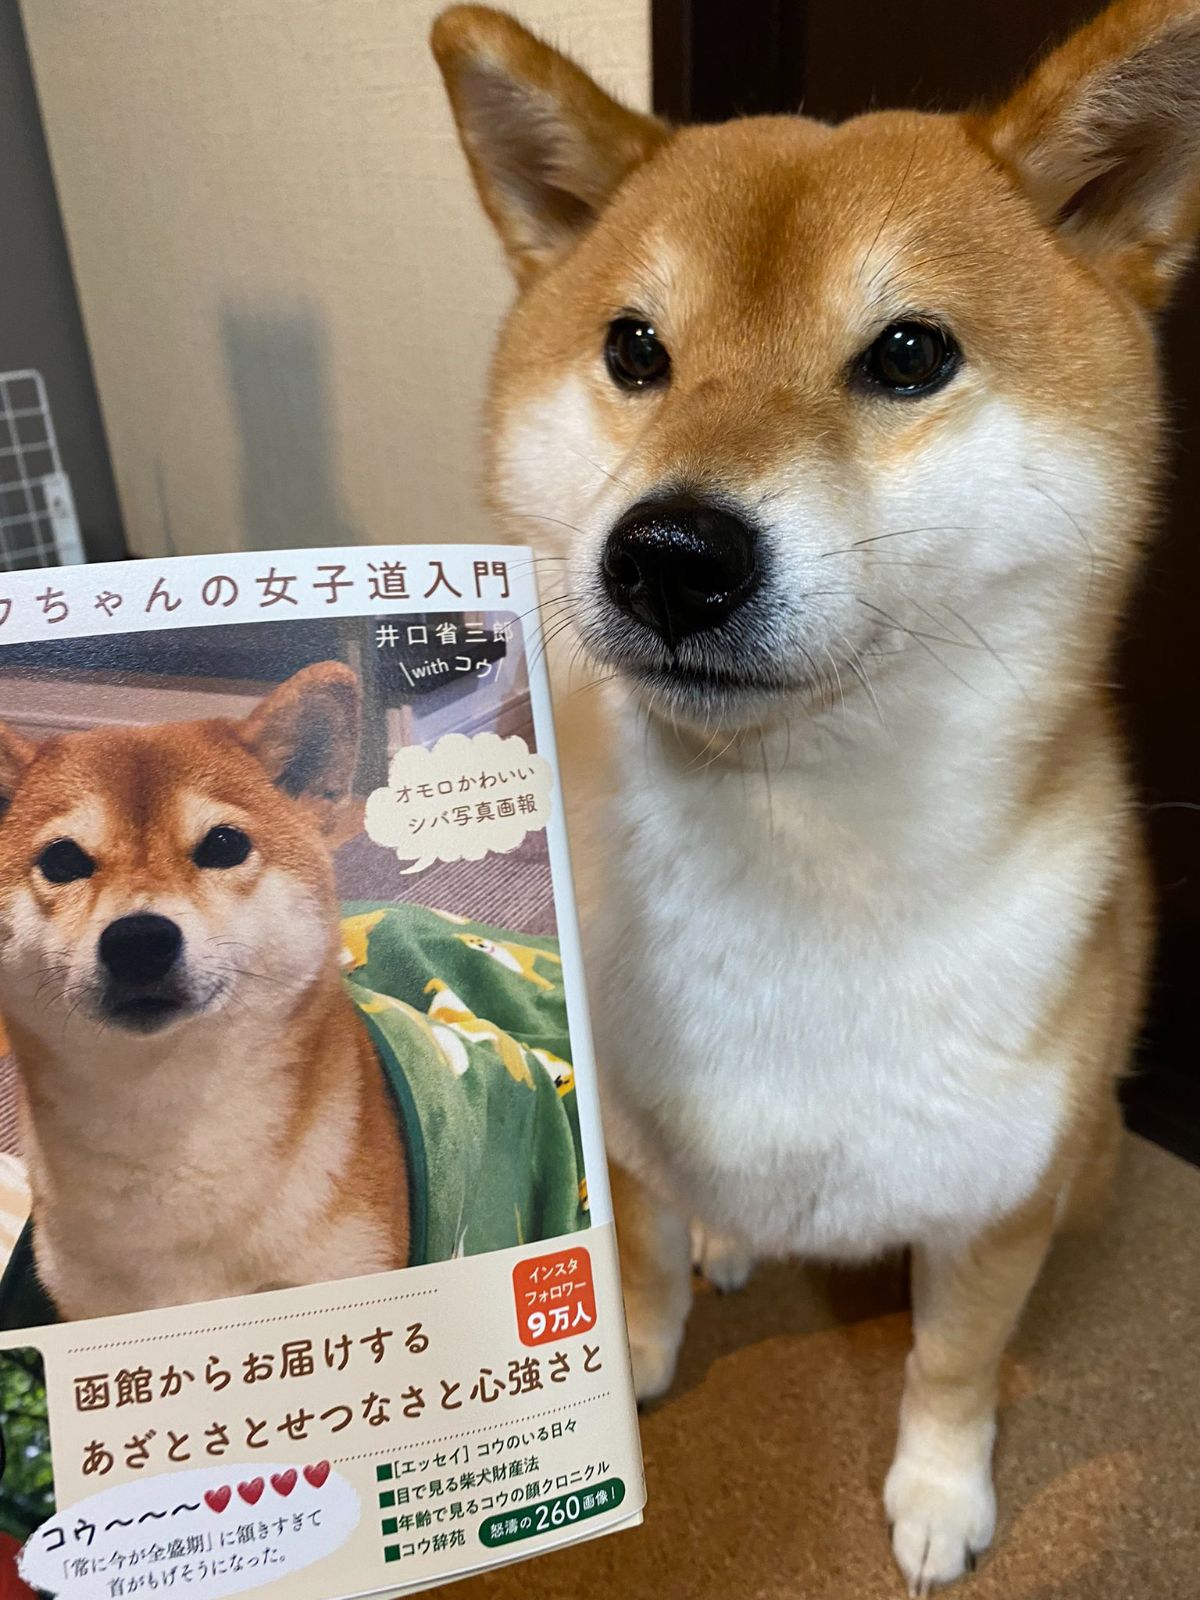 brown and white shiba inu sitting on floor next to a Japanese poster of the same dog